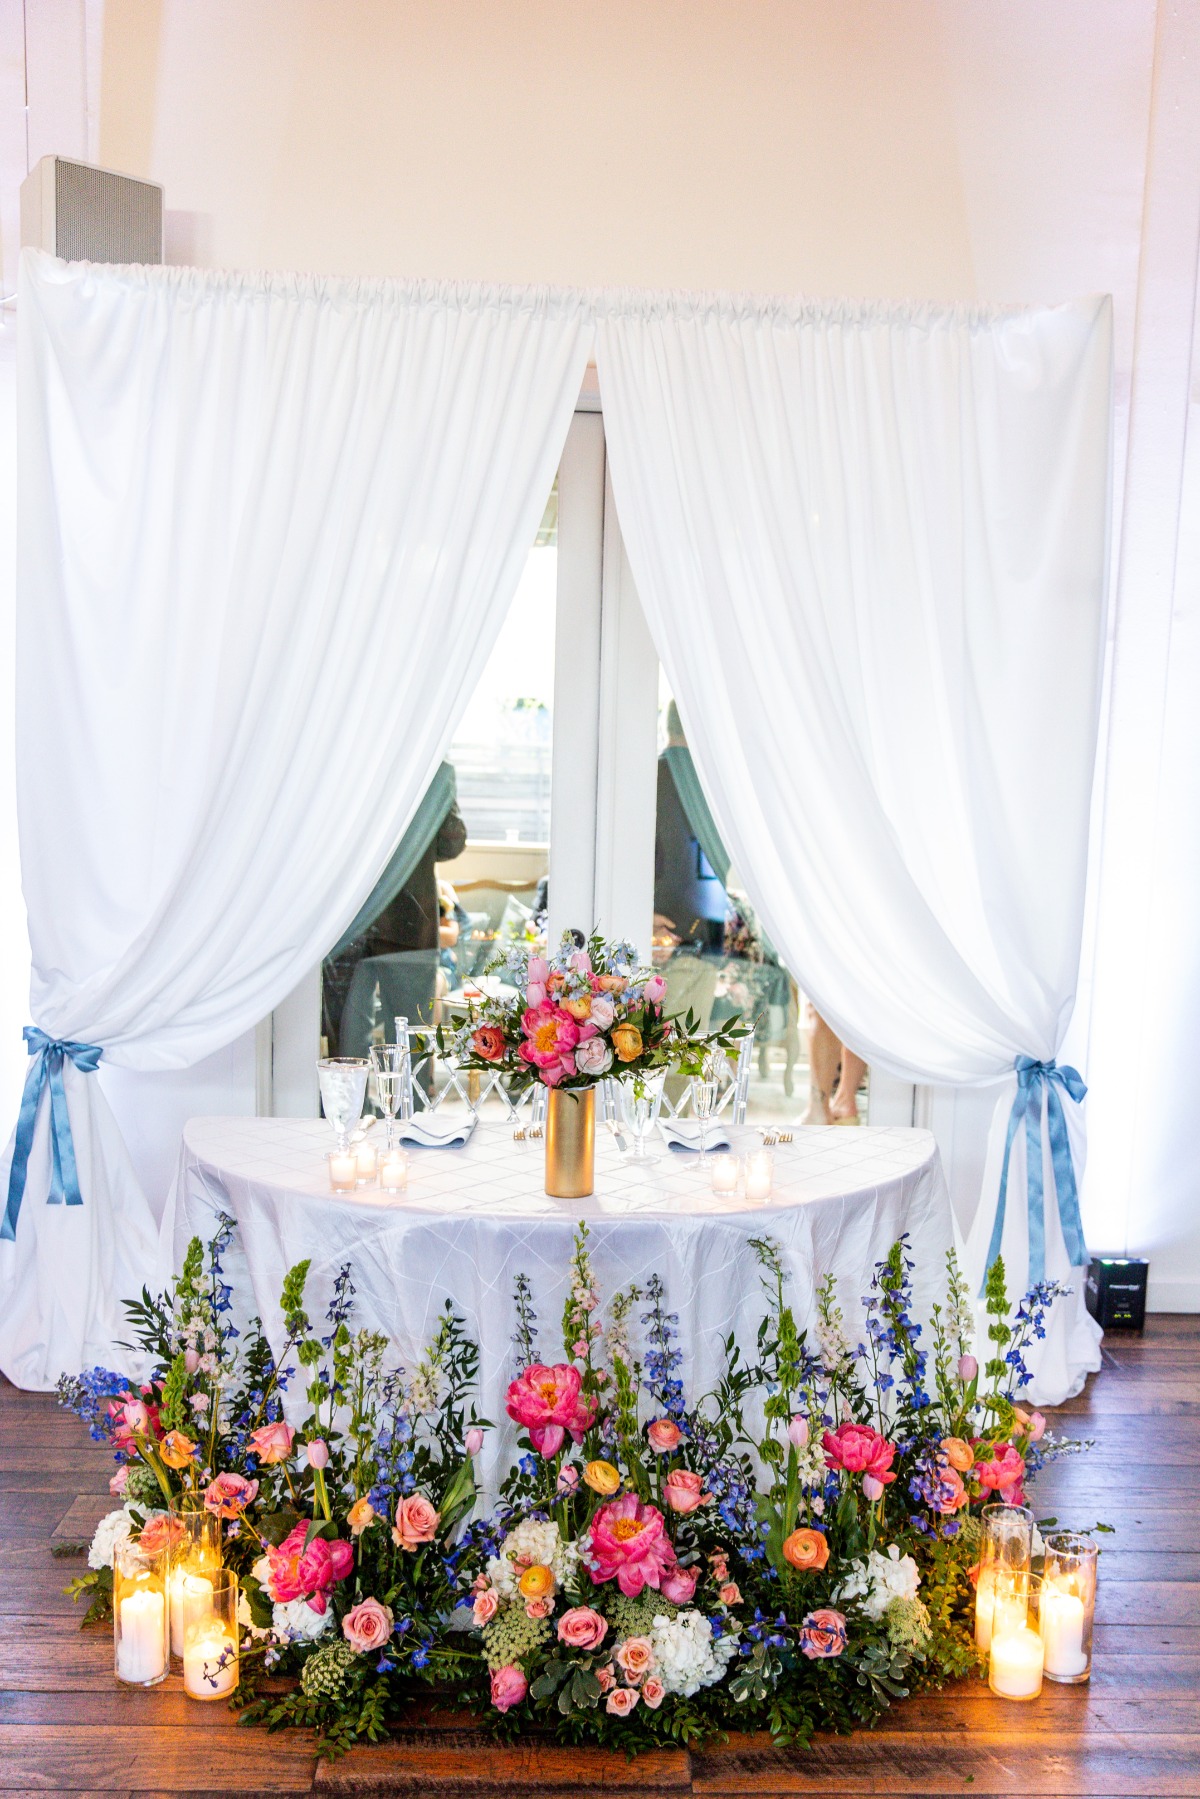 sweetheart table surrounded by summer flowers